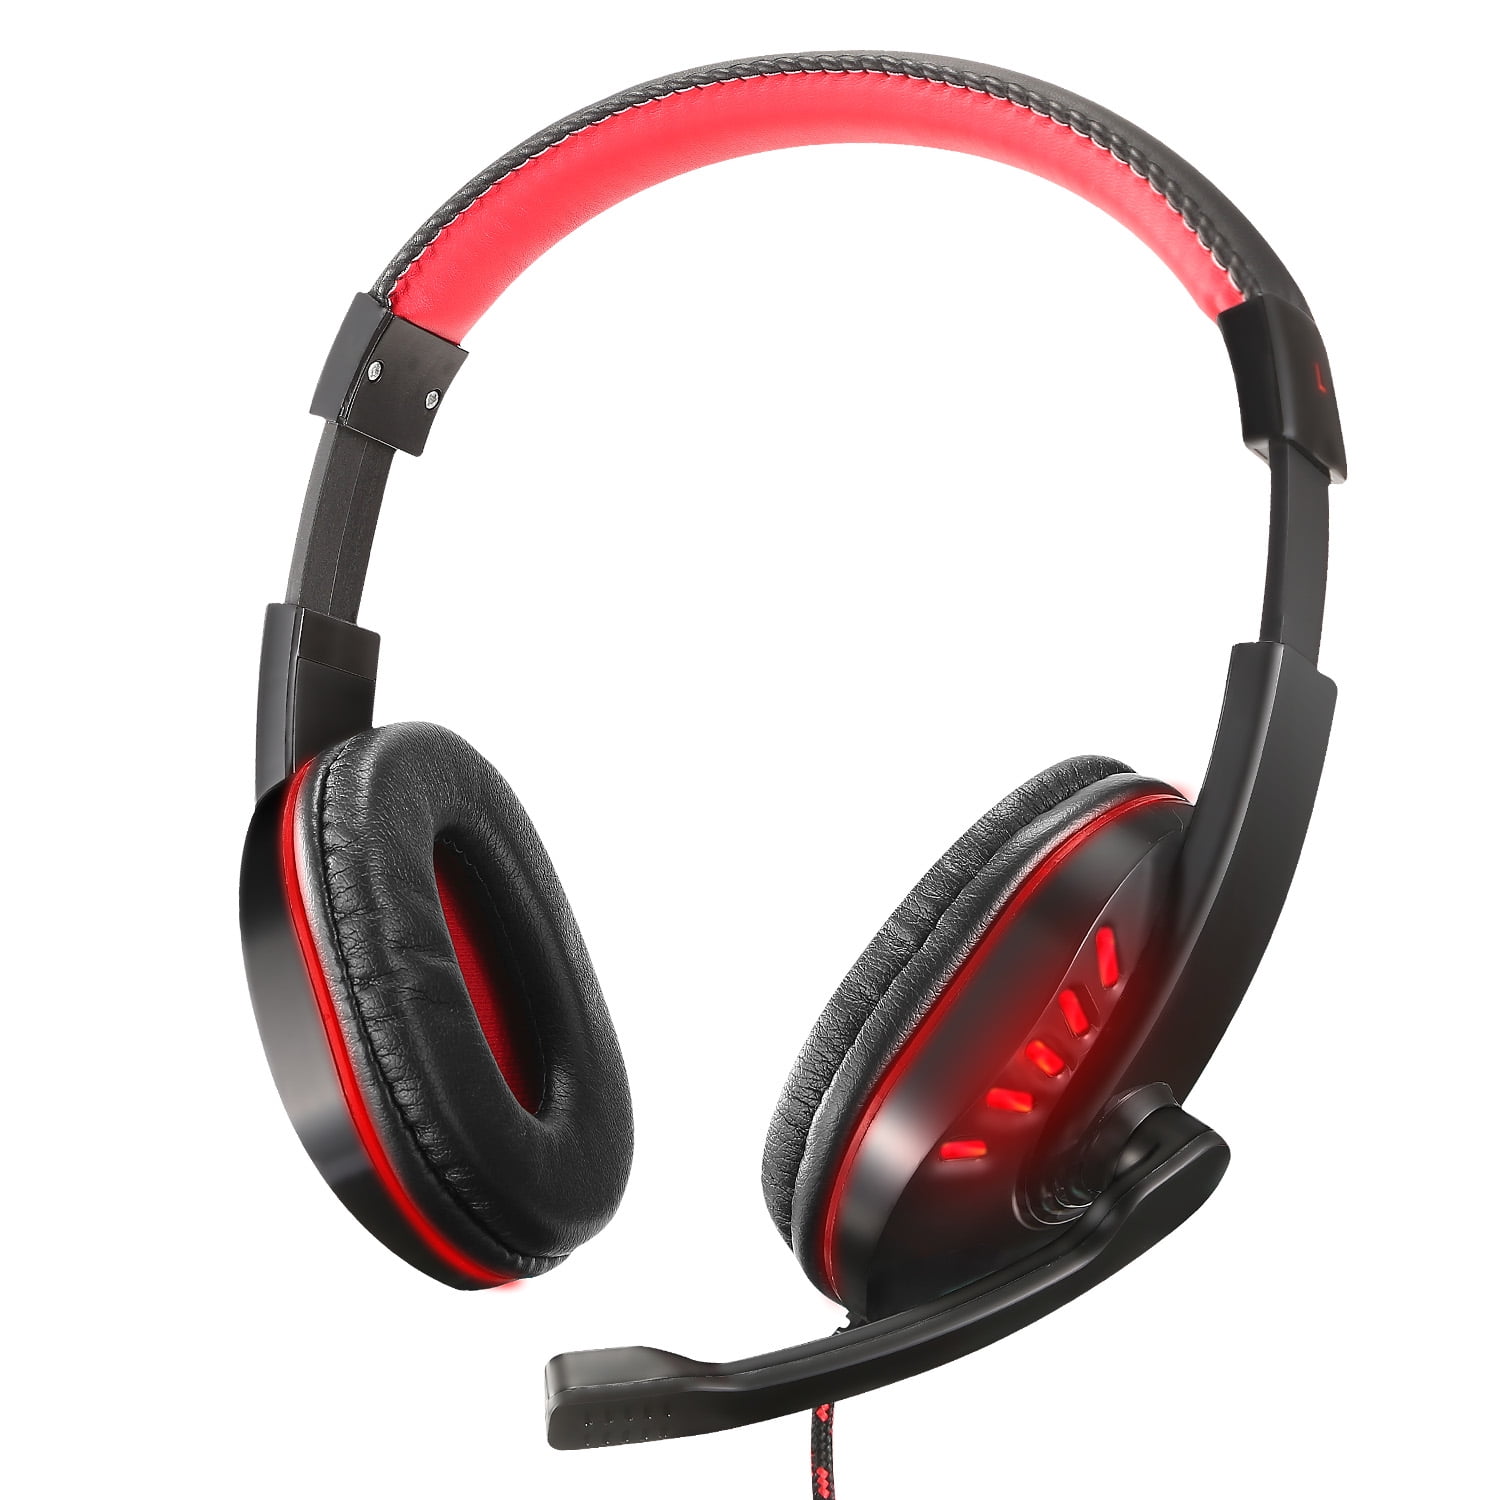 OUYAWEI Fashion Wired Gaming Headset Headphone for PS4 Xbox One Nintend Switch PC red